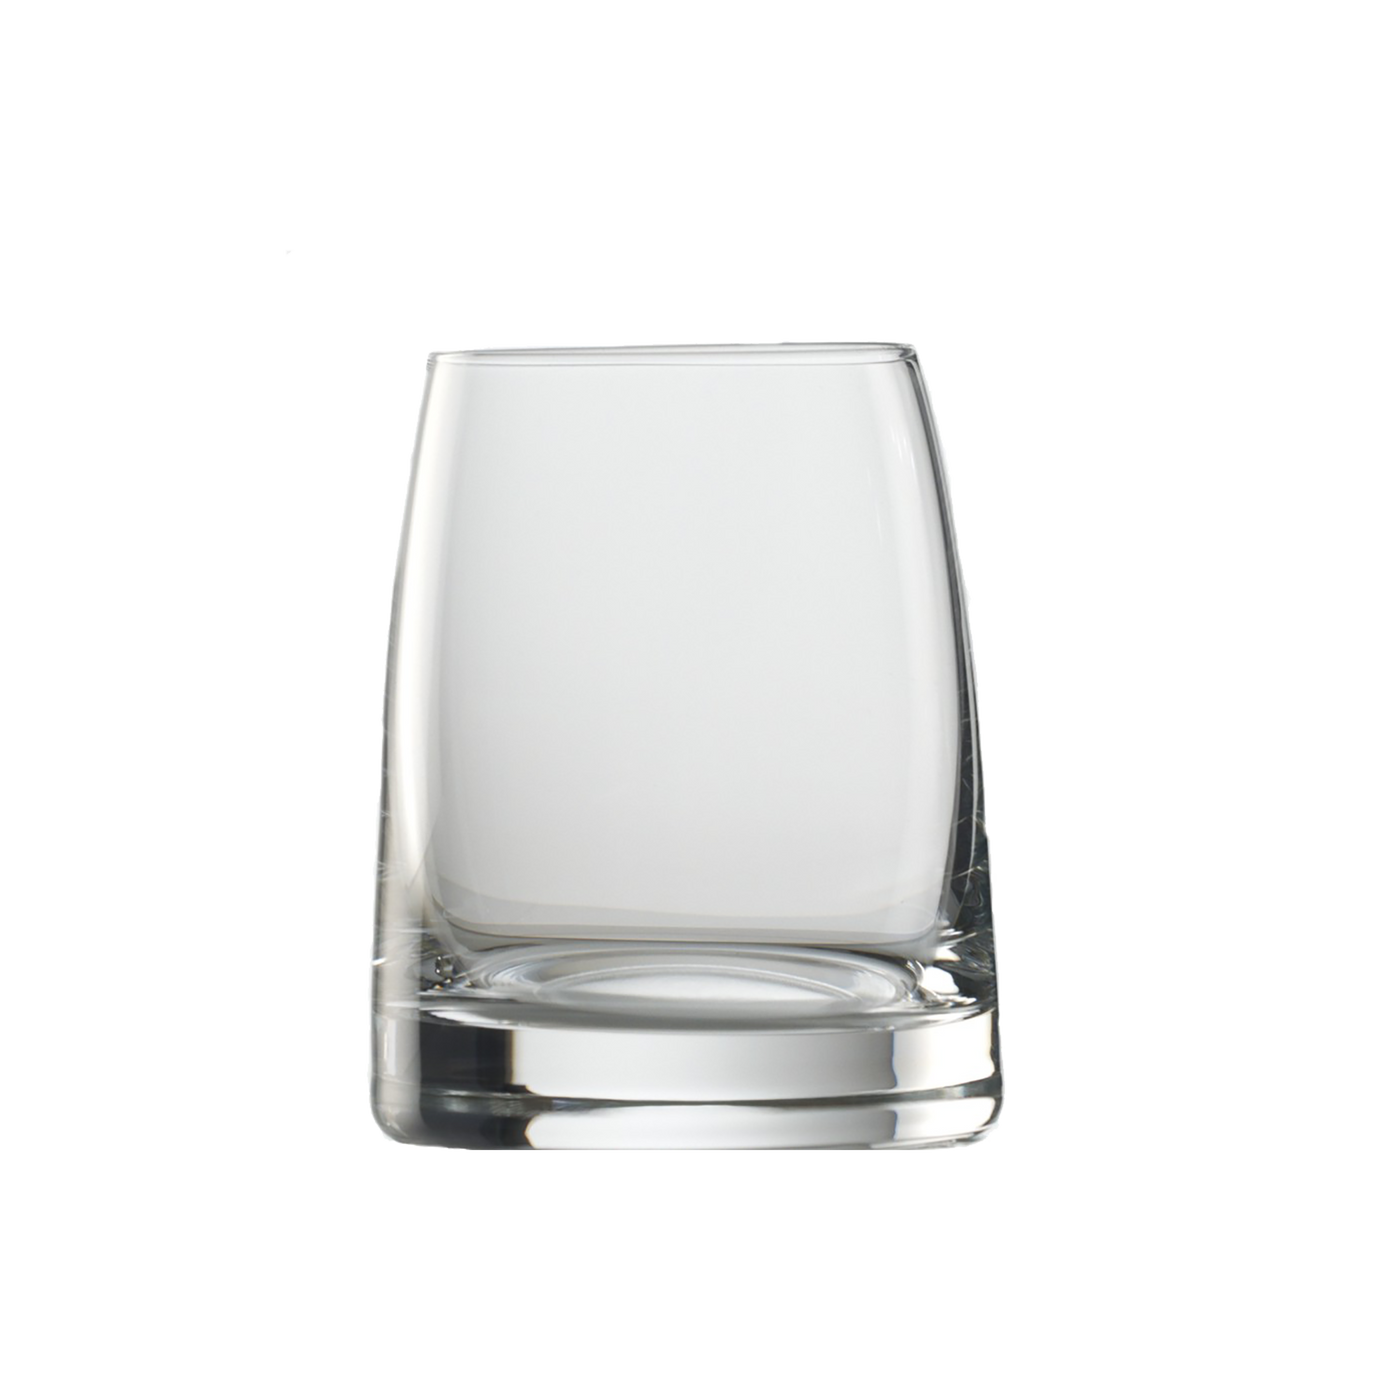 Experience Whiskey/Tequila Glass 5 oz - Set of 4